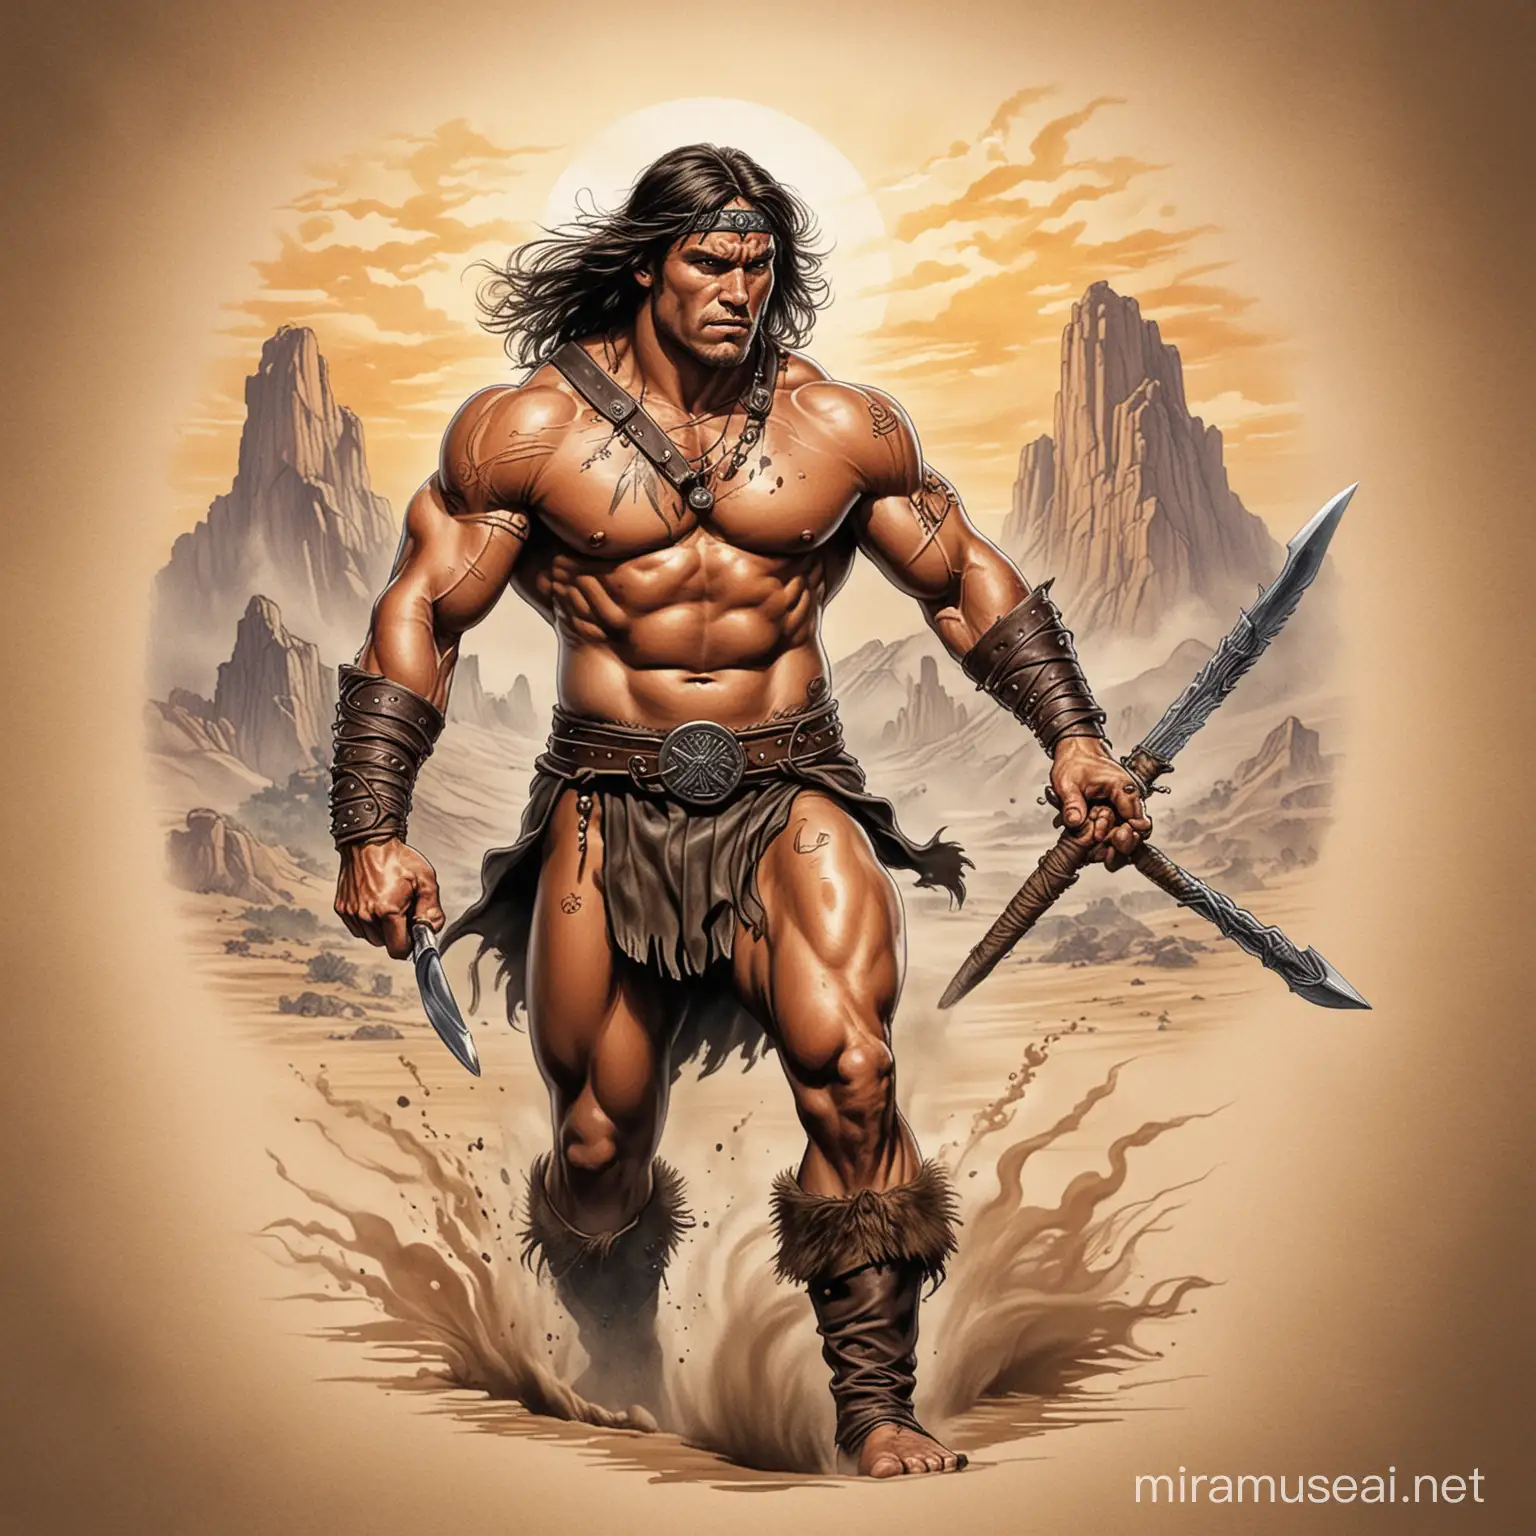 Barbarian Warrior with Colorful Tattoos and Traditional Club in Alfredo Alcala Art Style